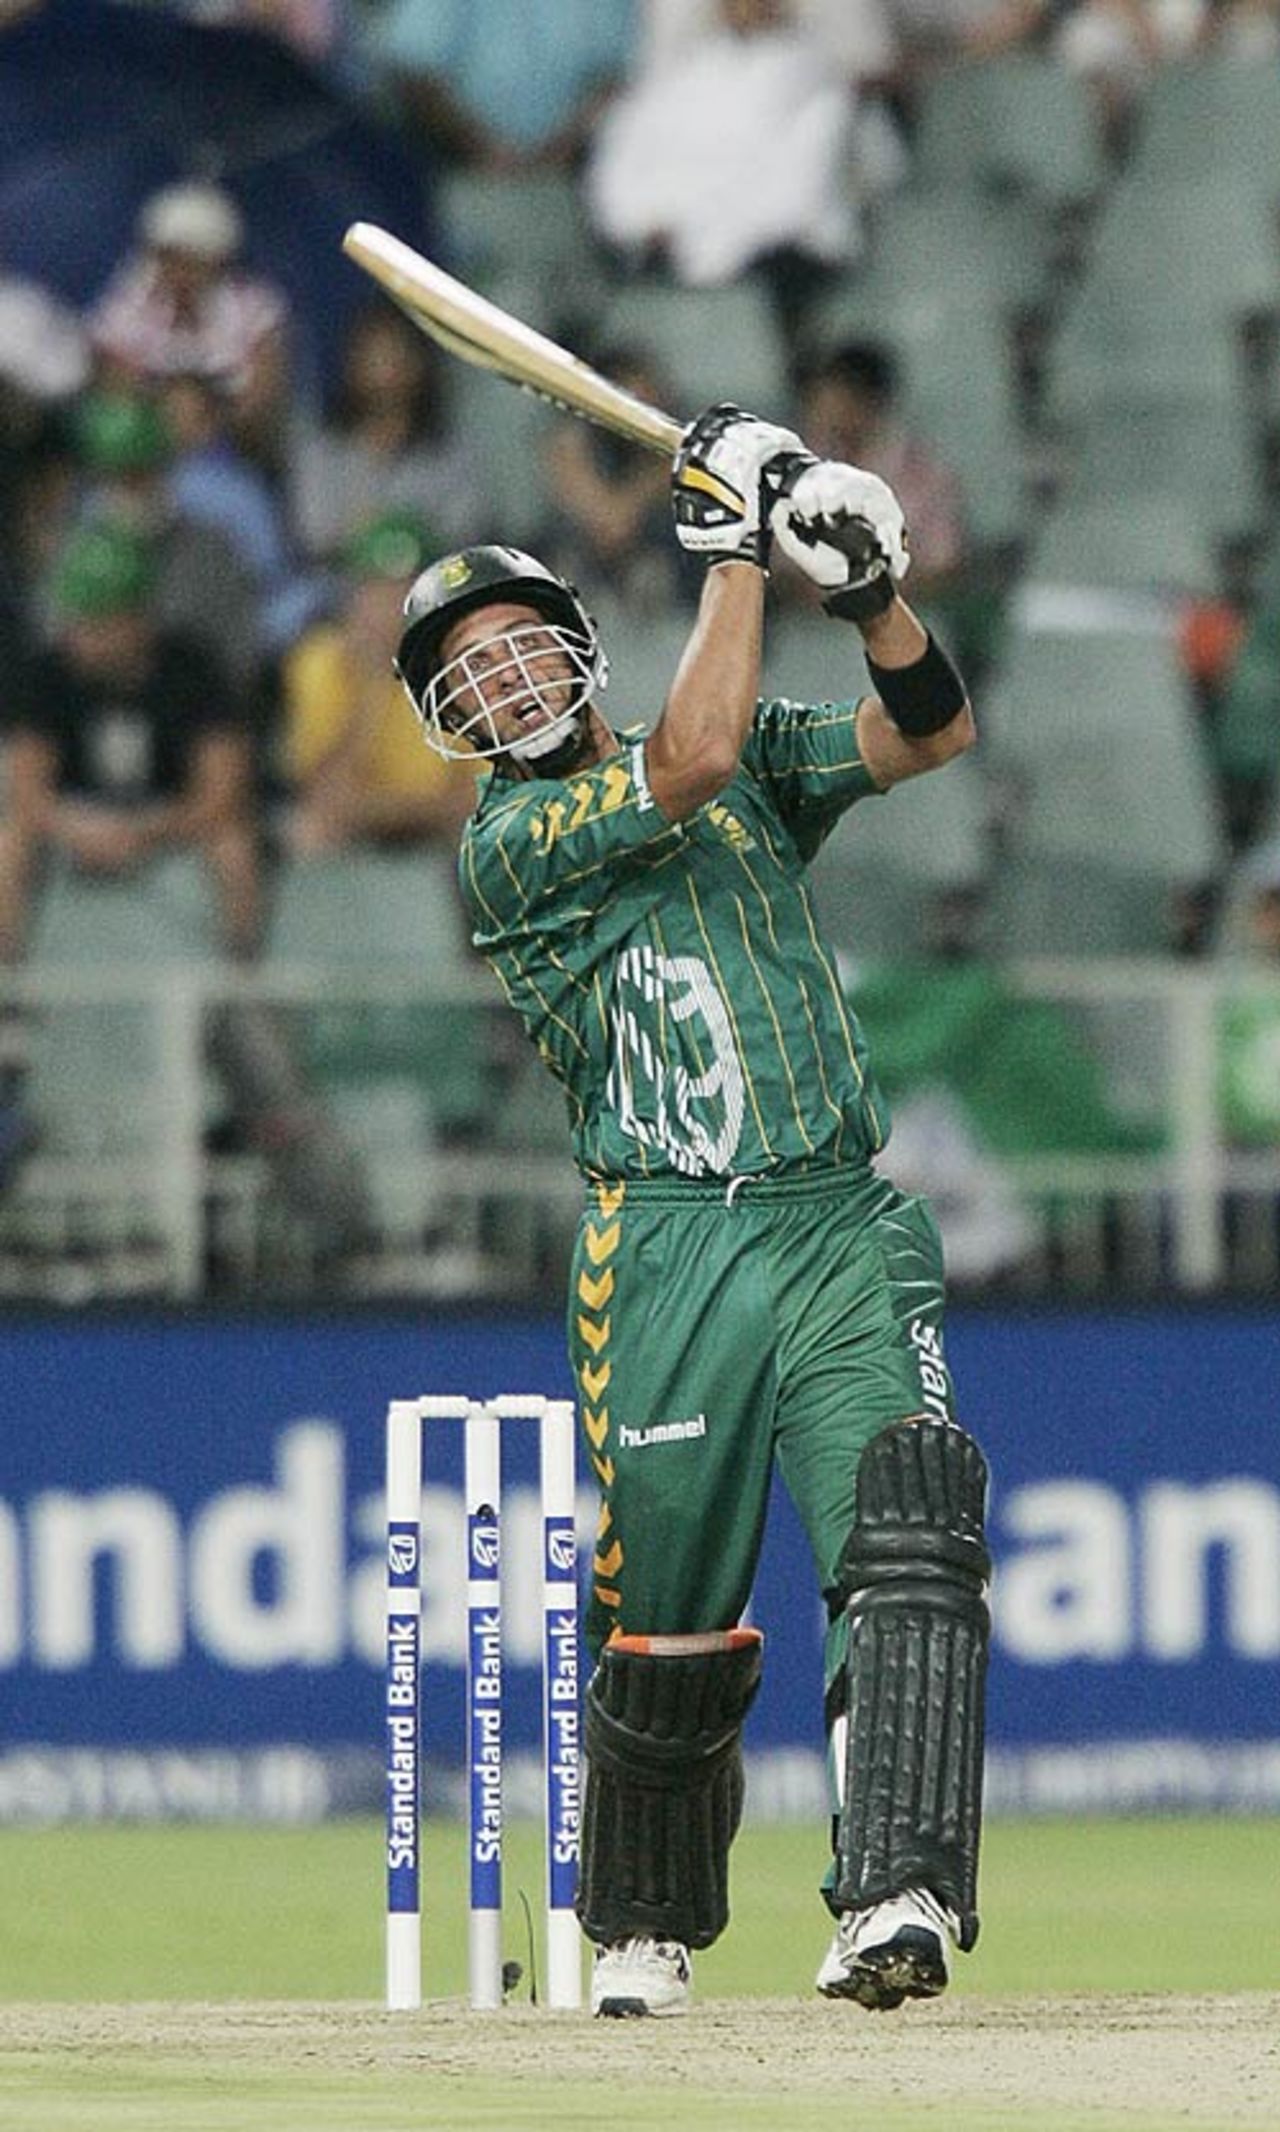 Johan van der Wath clouts one over the top, South Africa v India, Pro20, Johannesburg, December 1, 2006